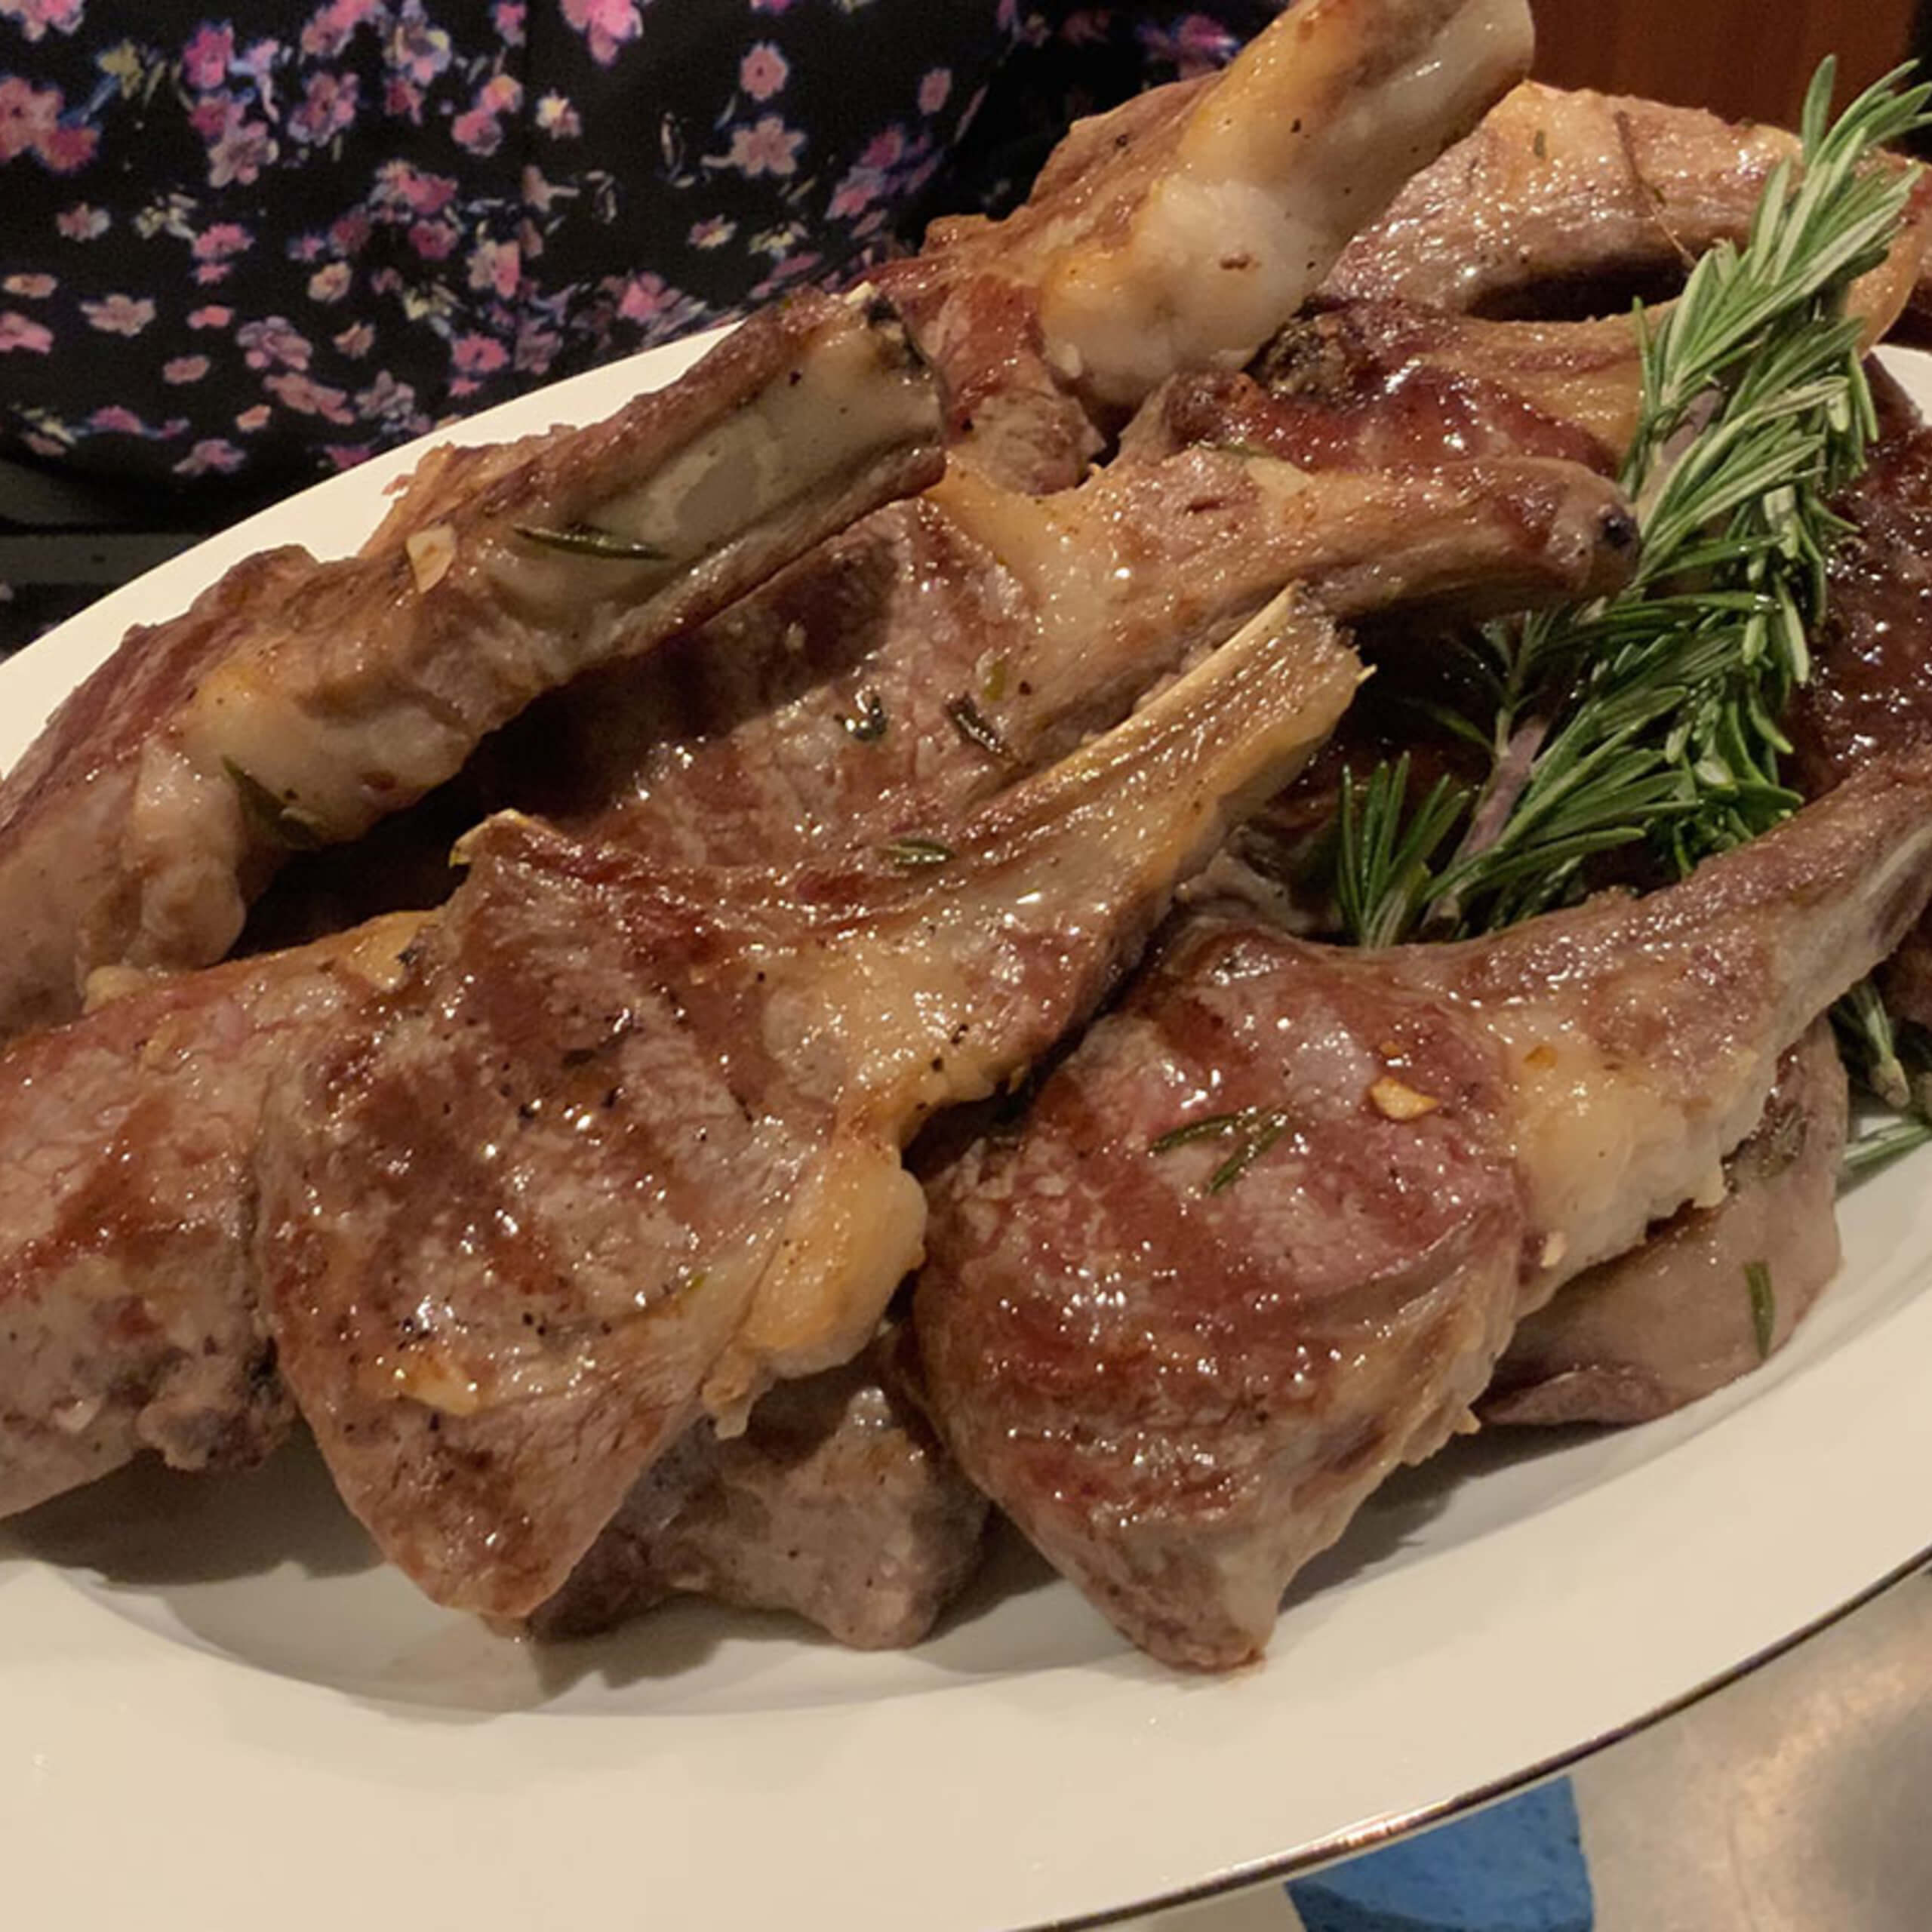 Grilled Baby Lamb Chops With Rosemary & Thyme With Roast Garlic Aioli on The Side | My Curated Tastes